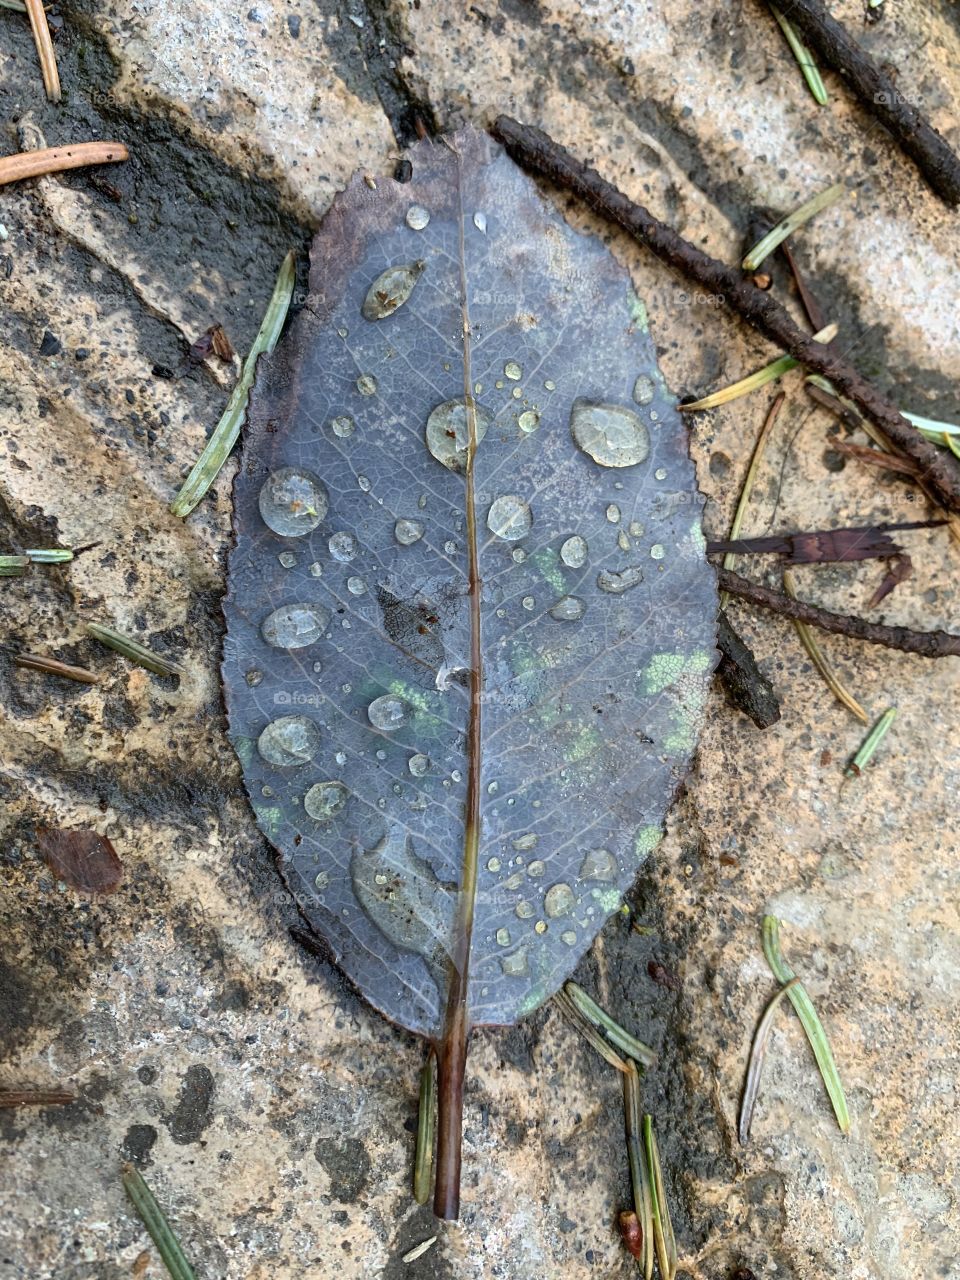 One leaf with raindrops